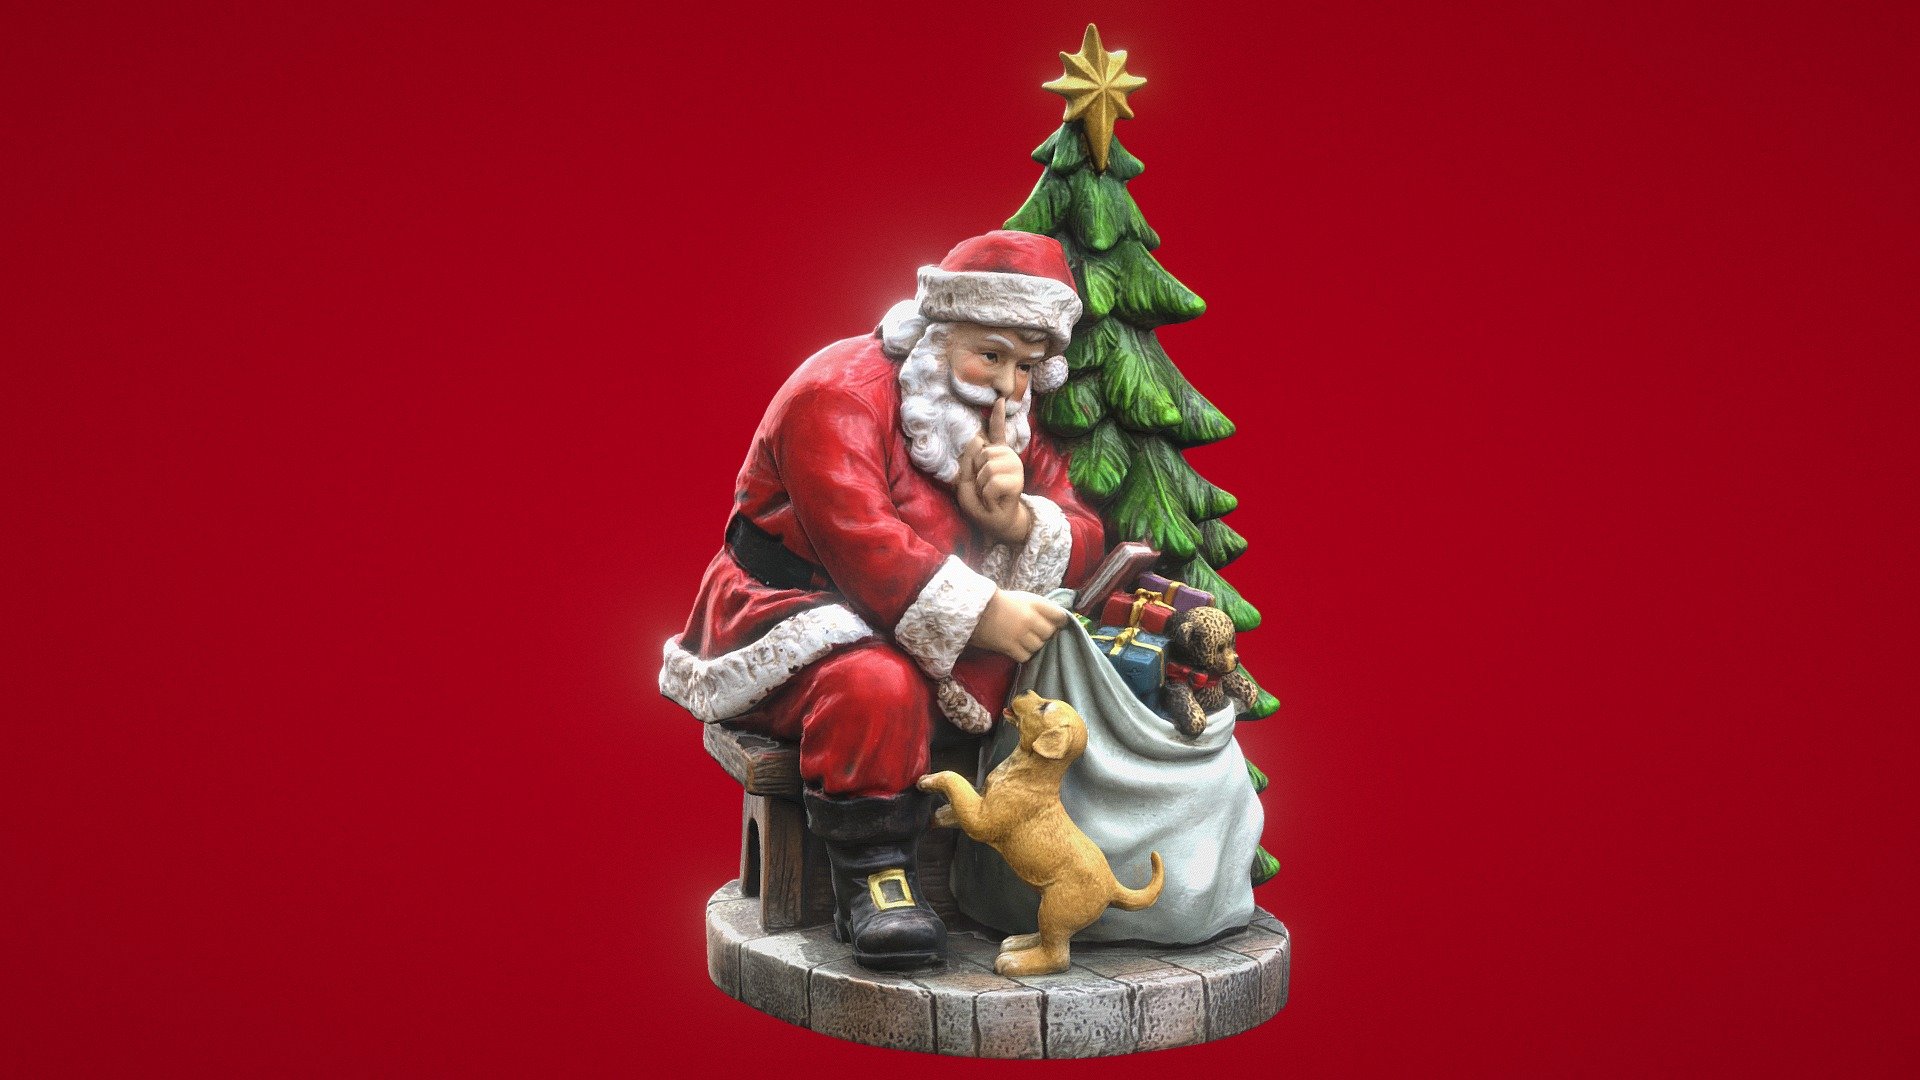 Small statue of Santa Claus photoscanned using Polycam's Photo Mode.

Santa Claus, also known as Father Christmas, Saint Nicholas, Saint Nick, Kris Kringle, or simply Santa, is a legendary character originating in Eastern Christian culture who is said to bring children gifts on Christmas Eve of toys and candy or coal or nothing, depending on whether they are &ldquo;naughty or nice